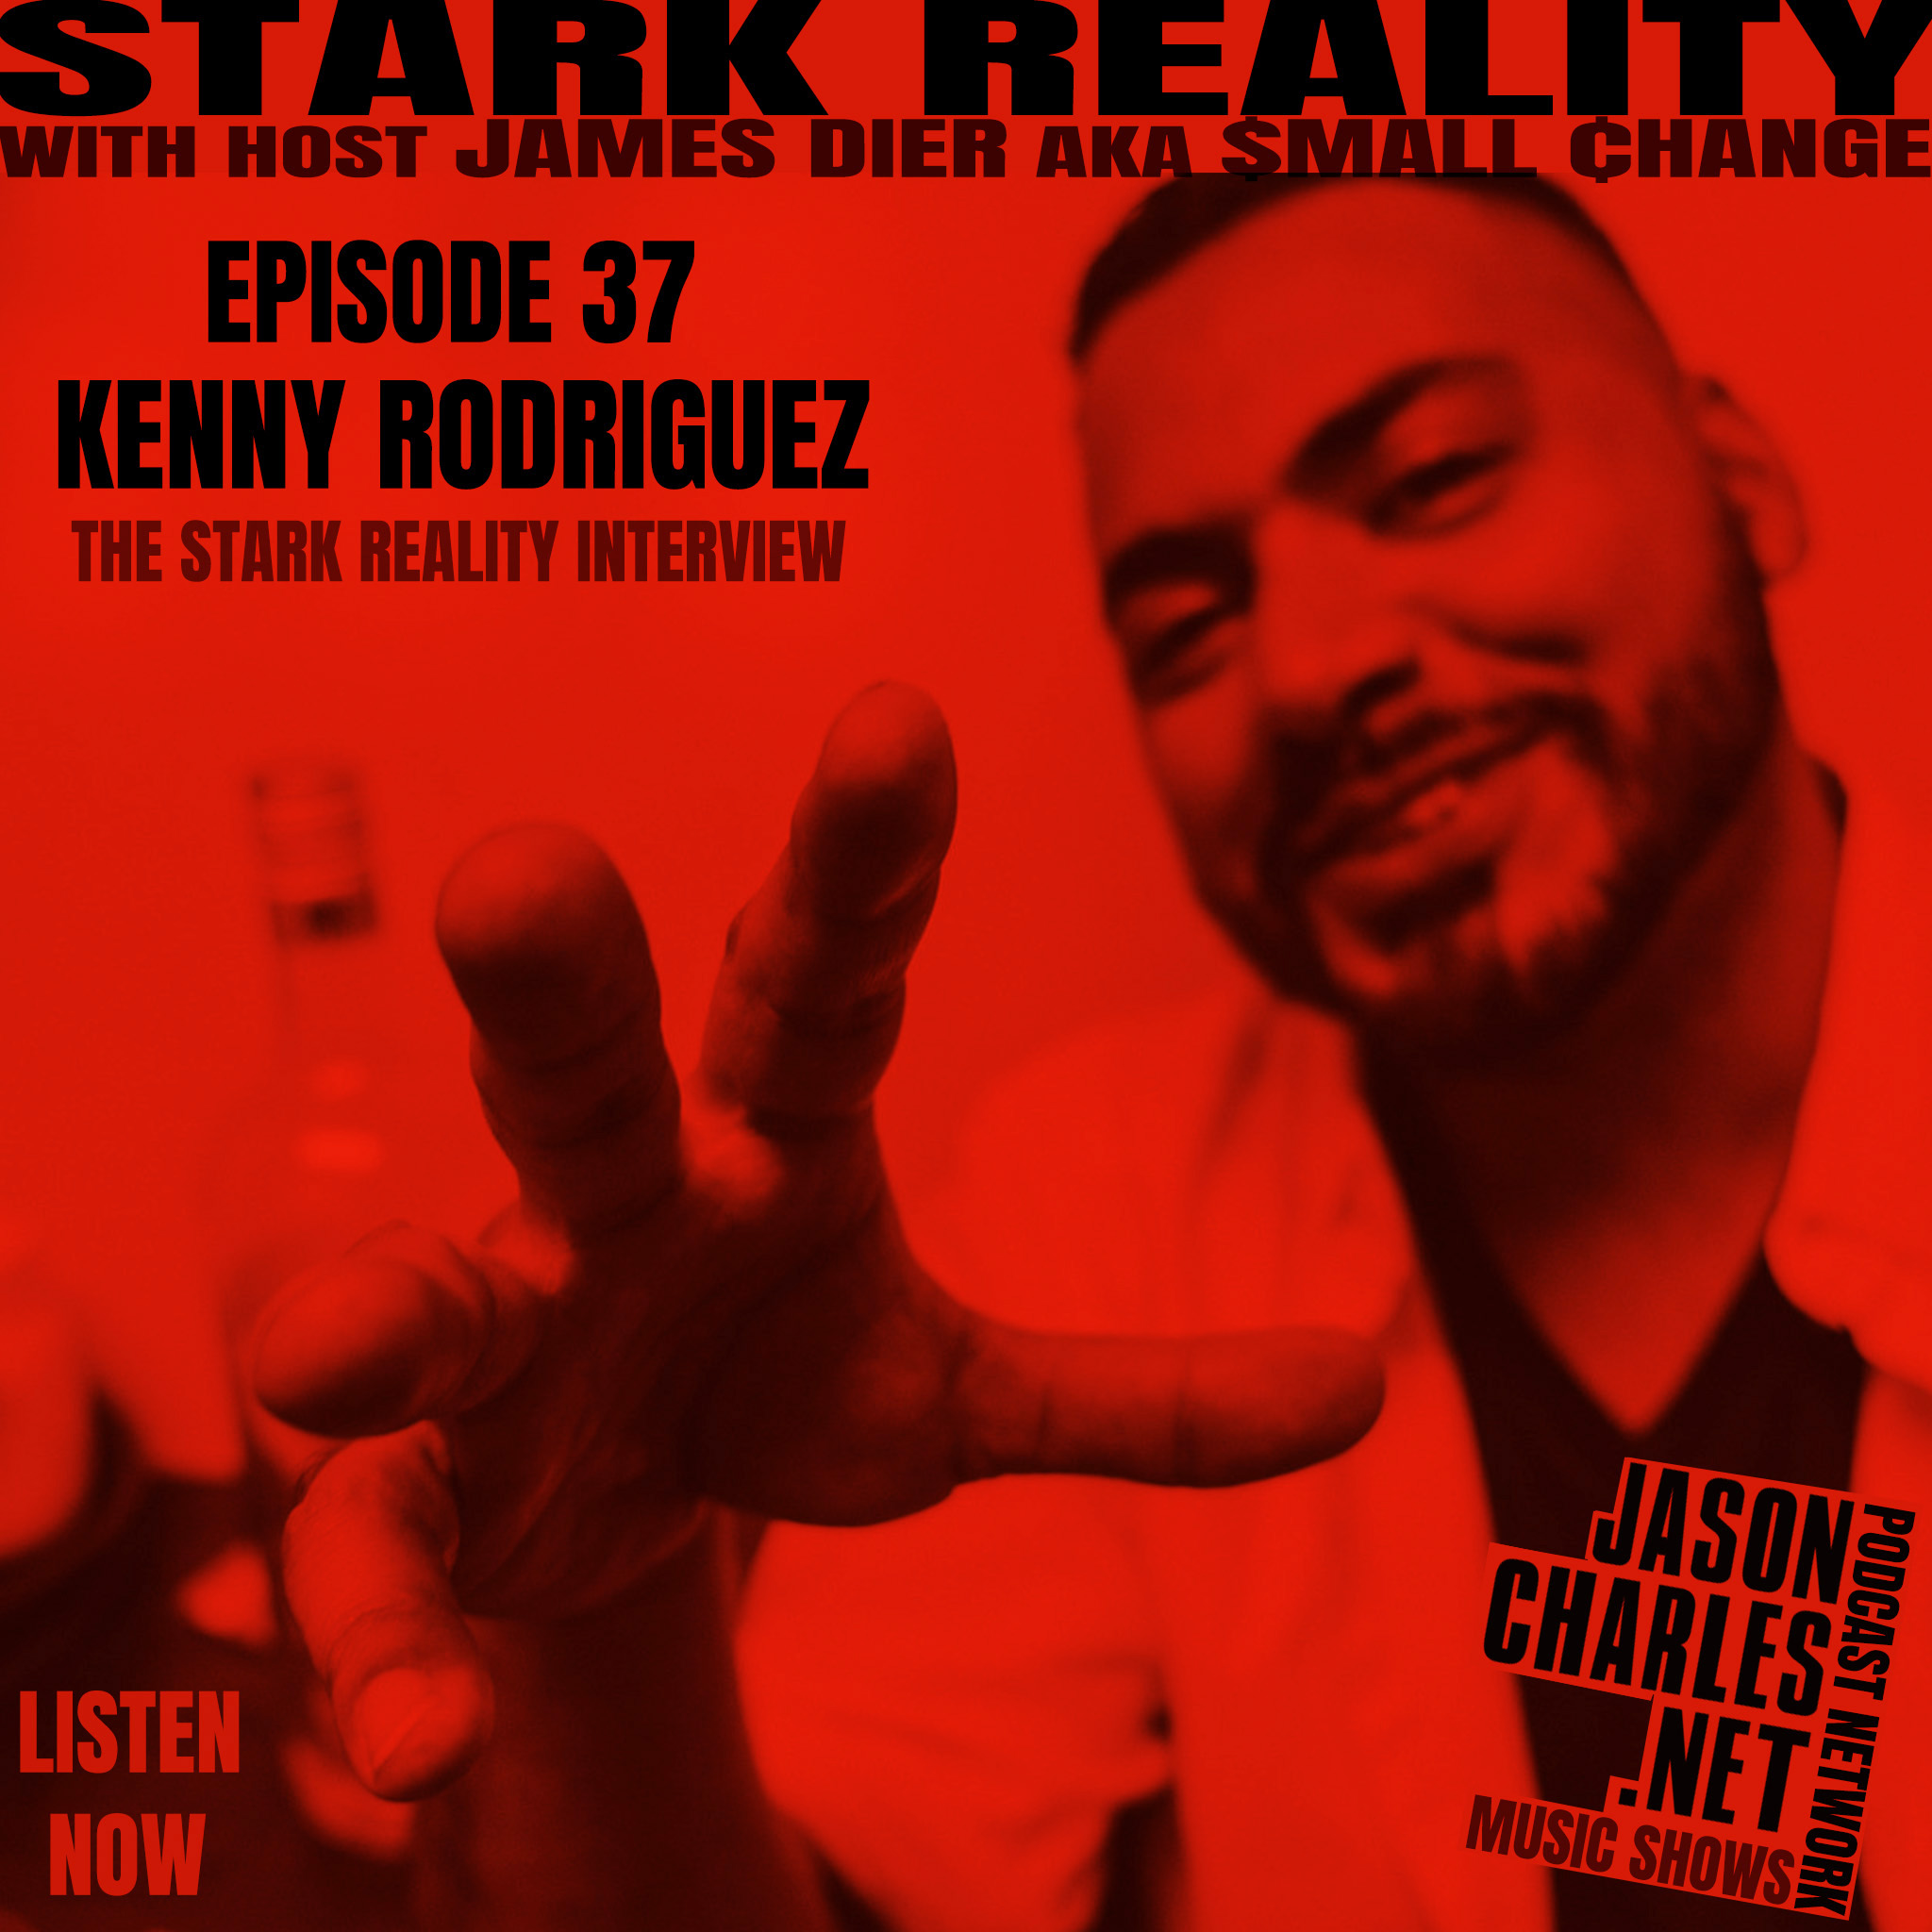 STARK REALITY Episode 37 Guest KENNY RODRIGUEZ